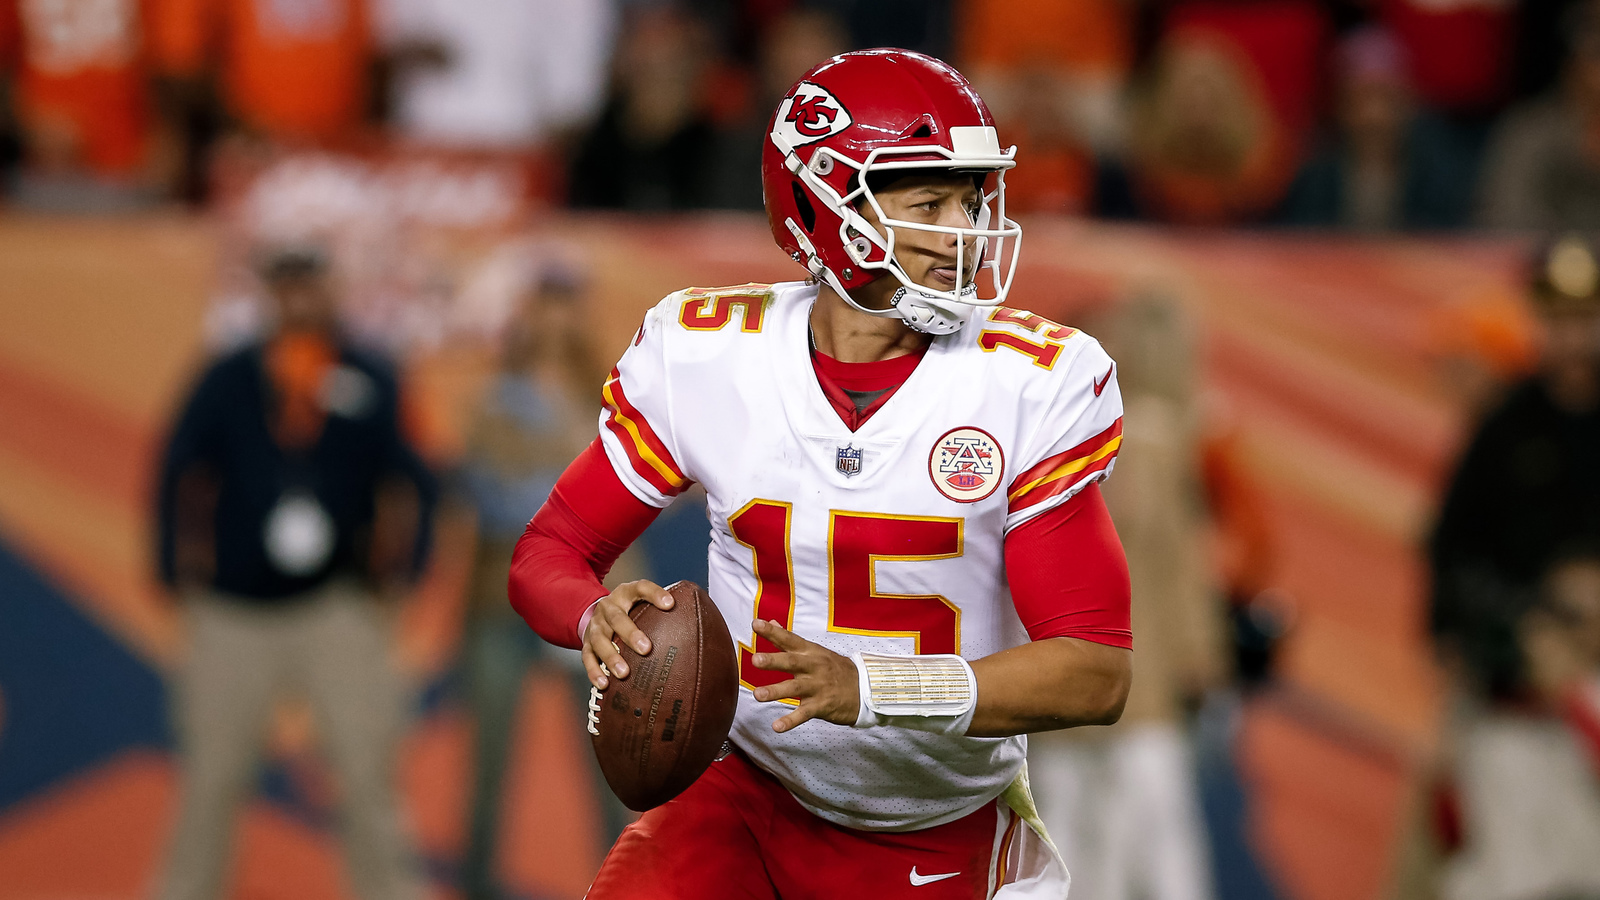 Watch: Patrick Mahomes shows off ridiculous arm strength on this throw